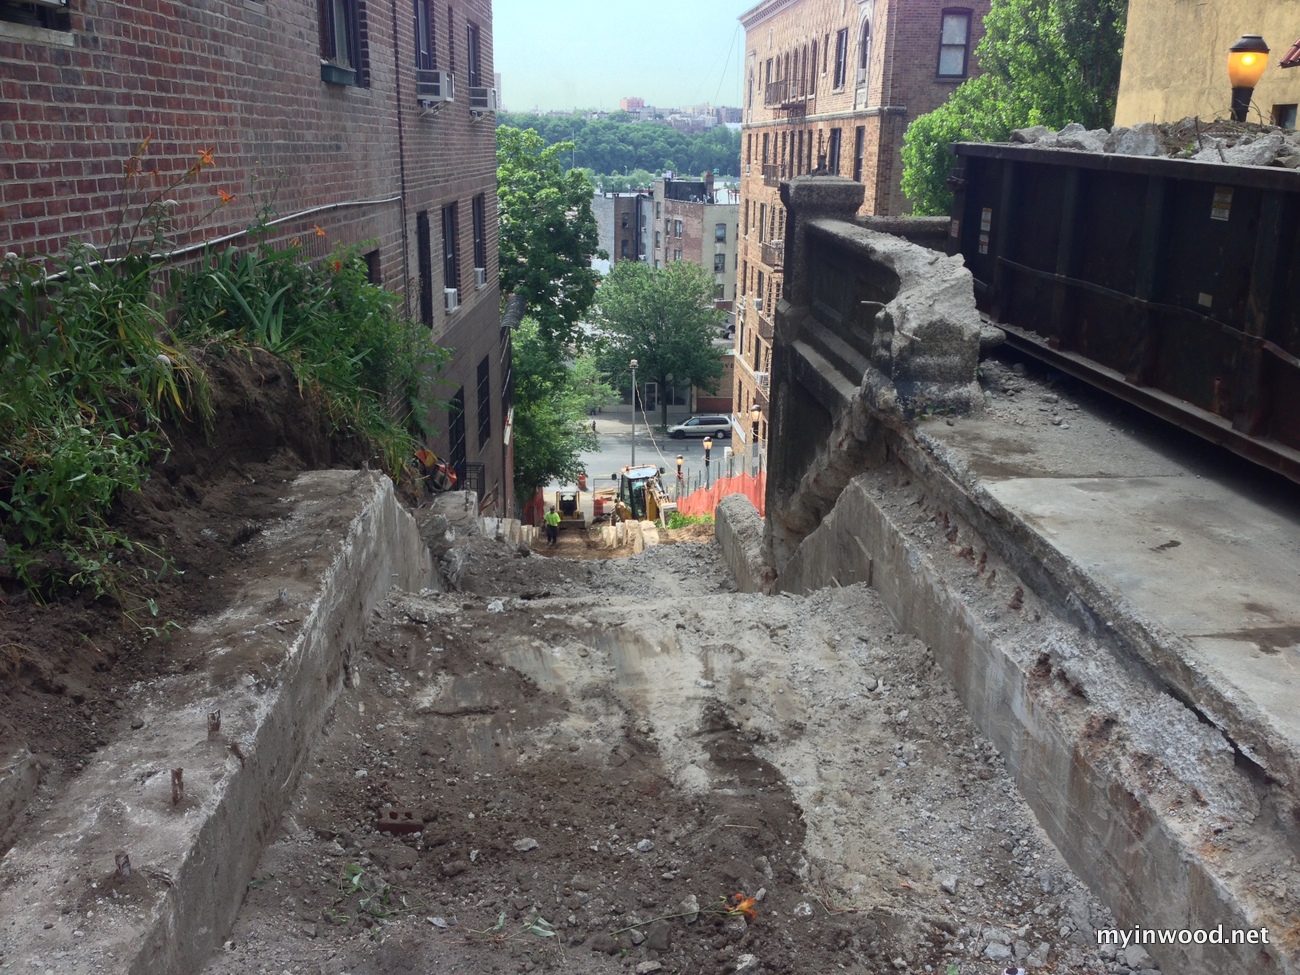 215th Street stairs, 6/30/2014